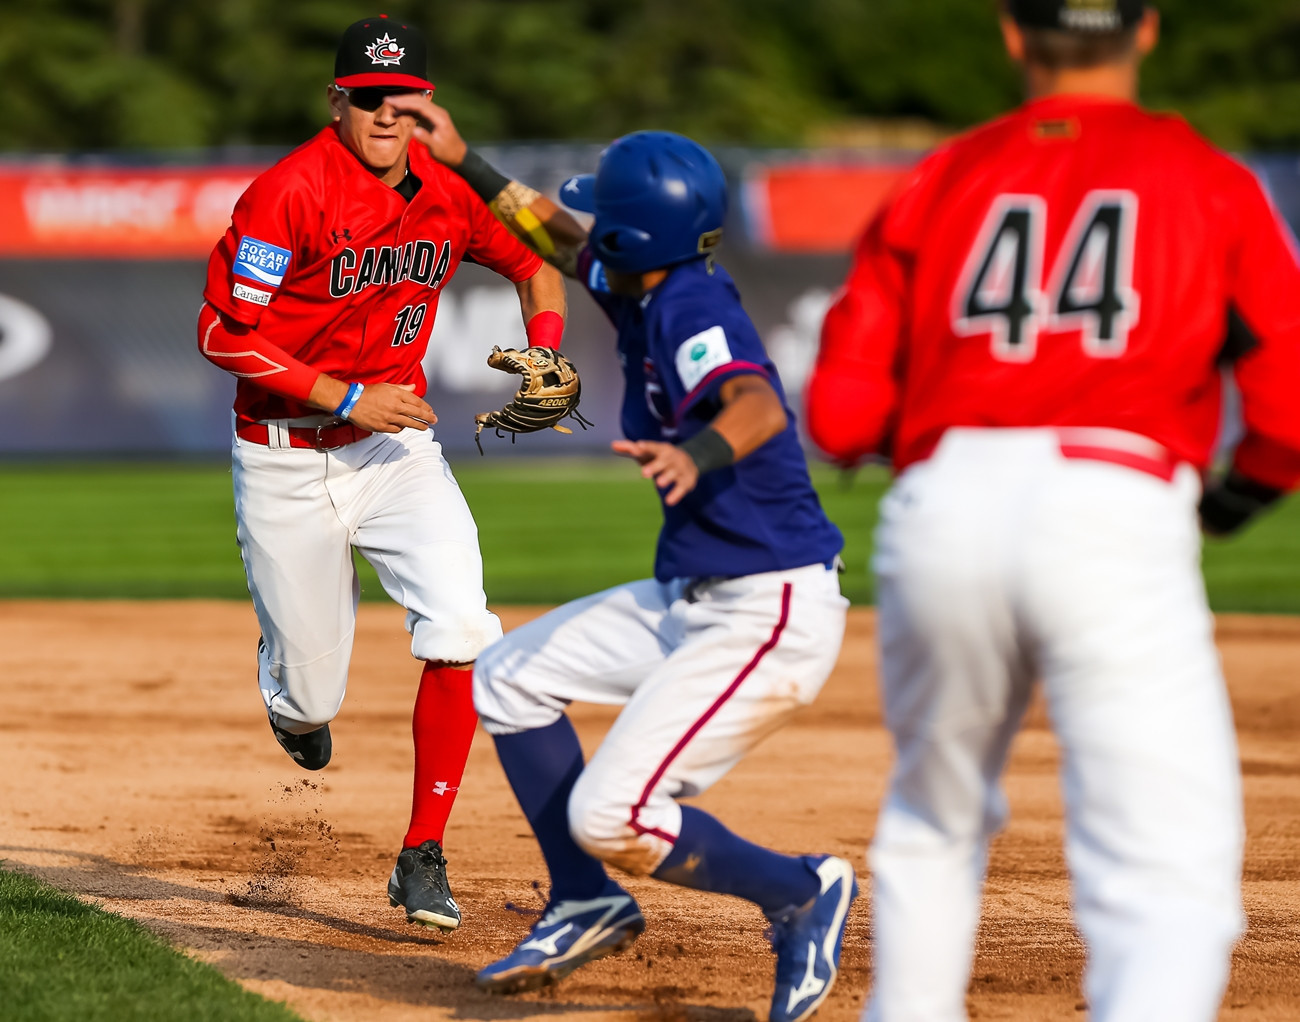 Chinese Taipei disappointed hosts Canada on day one ©WBSC